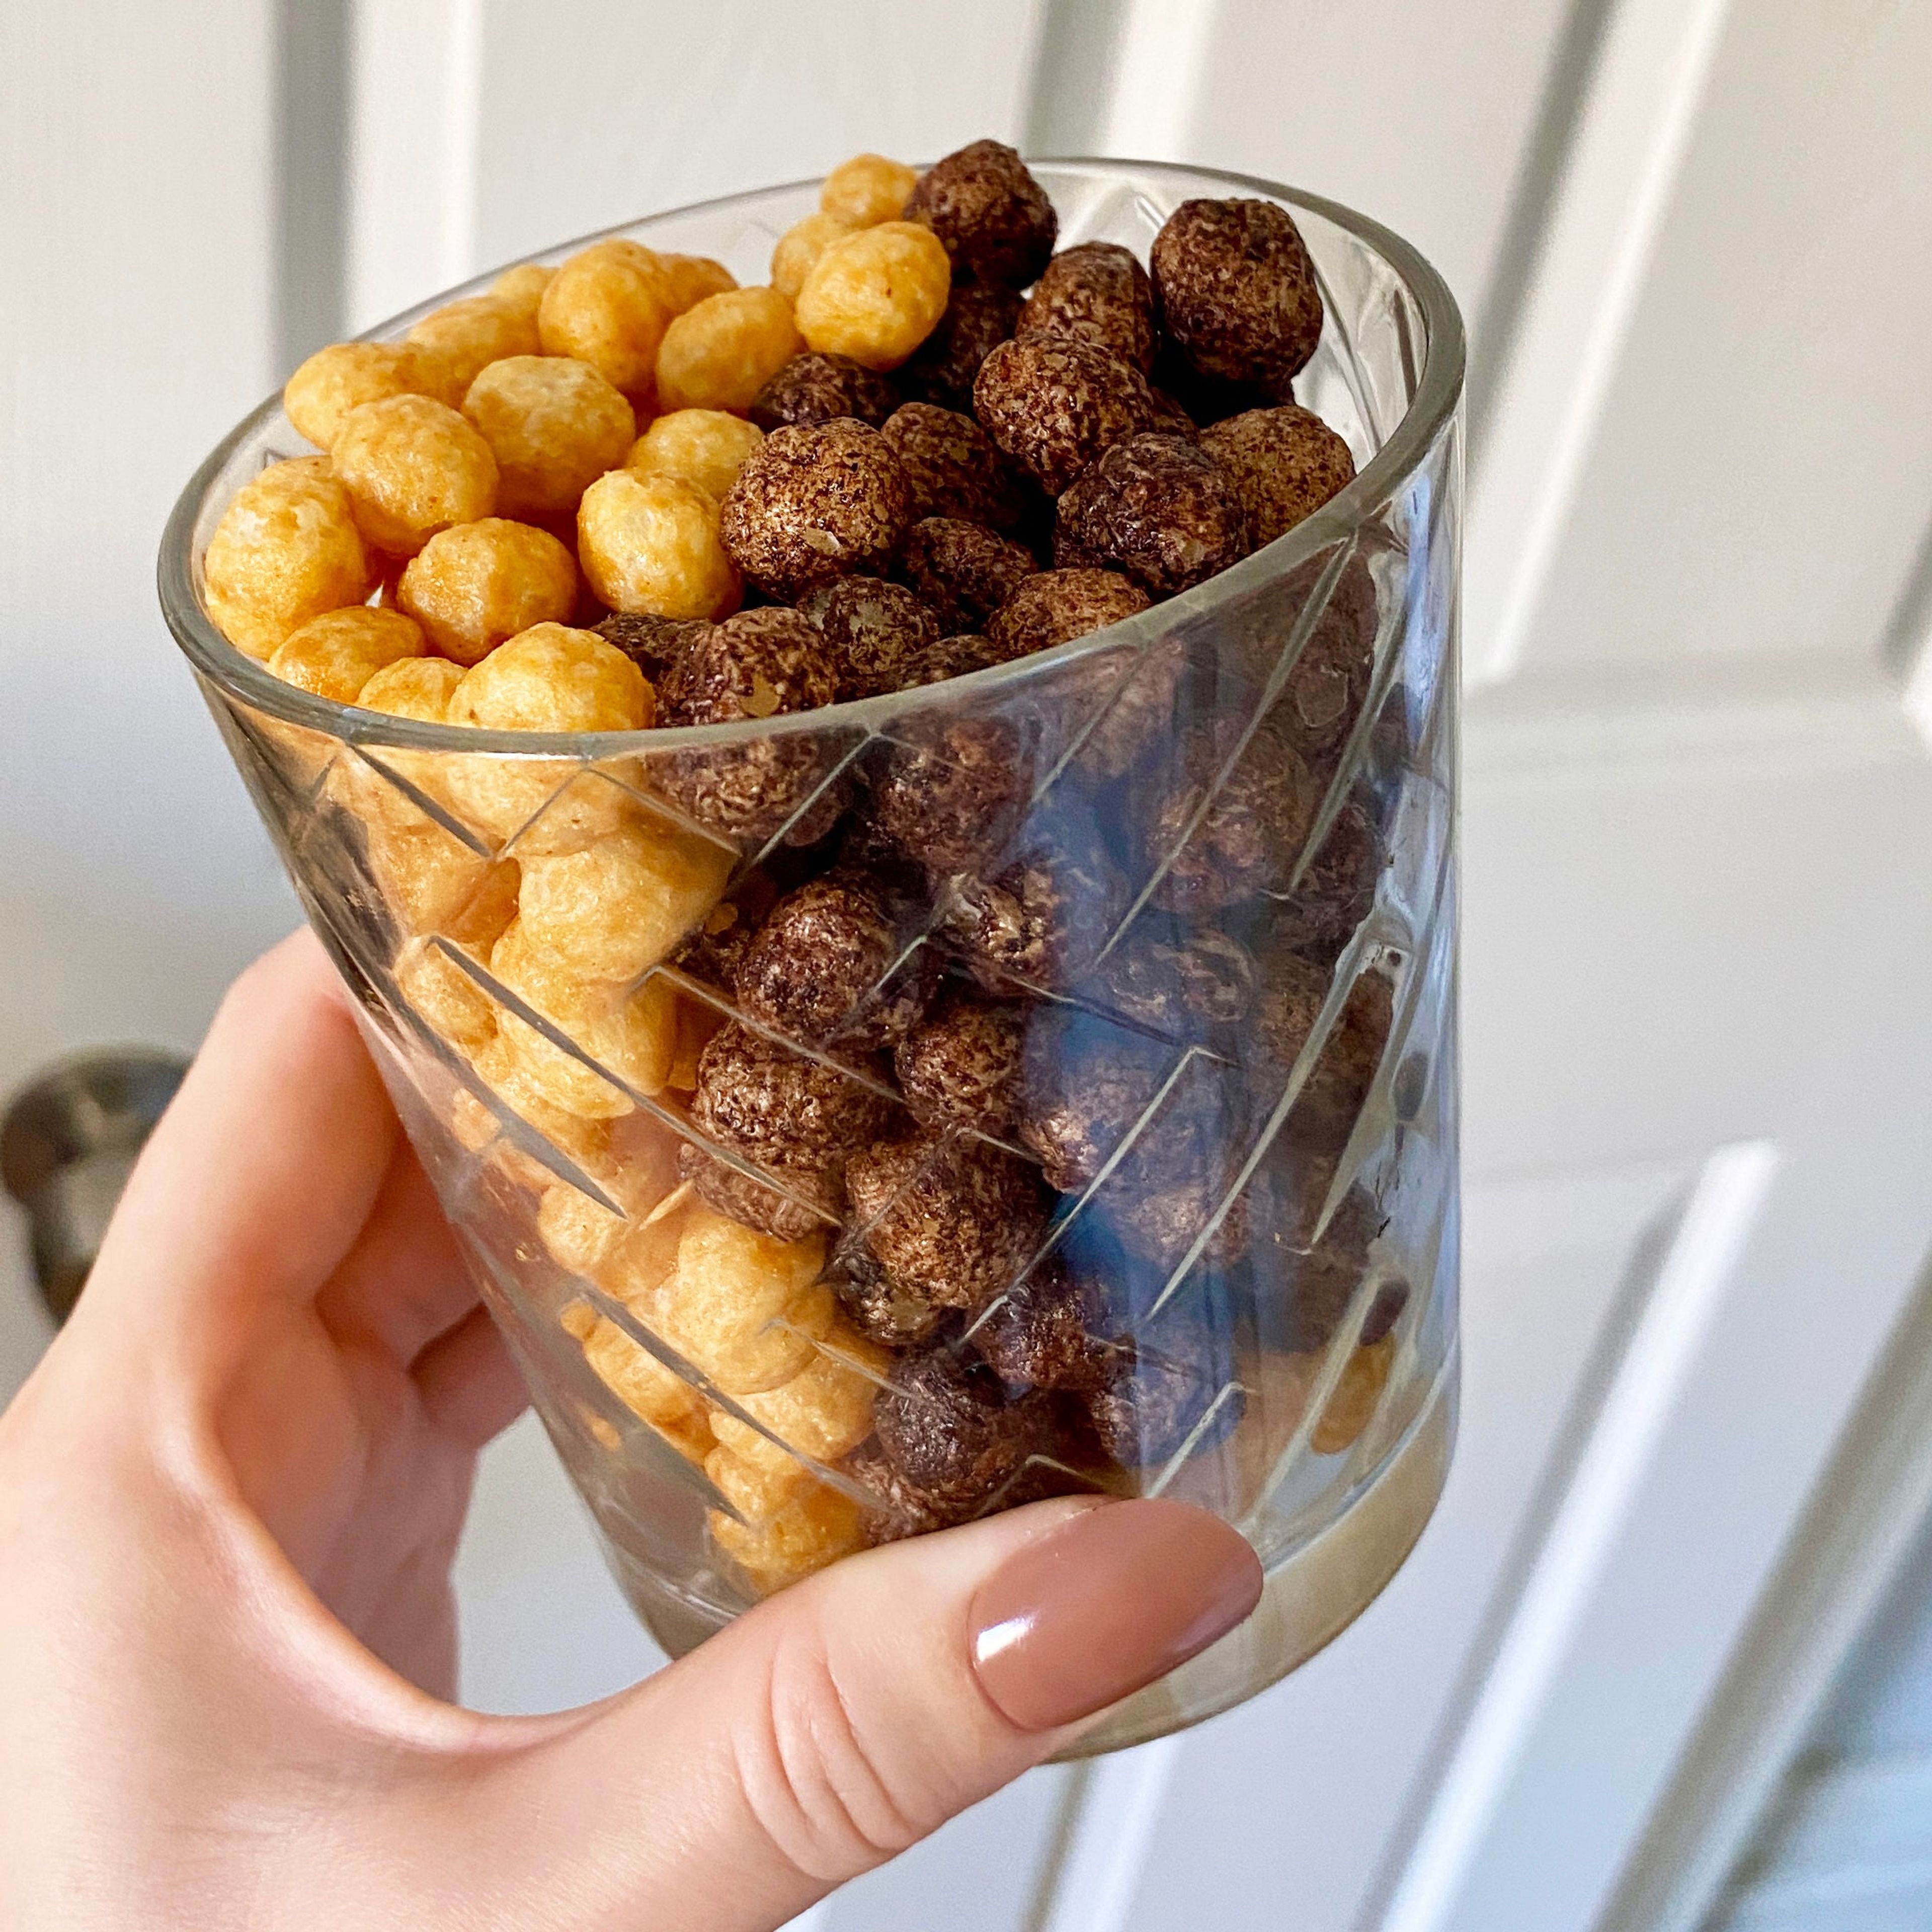 Keto Cereal (6 Boxes)